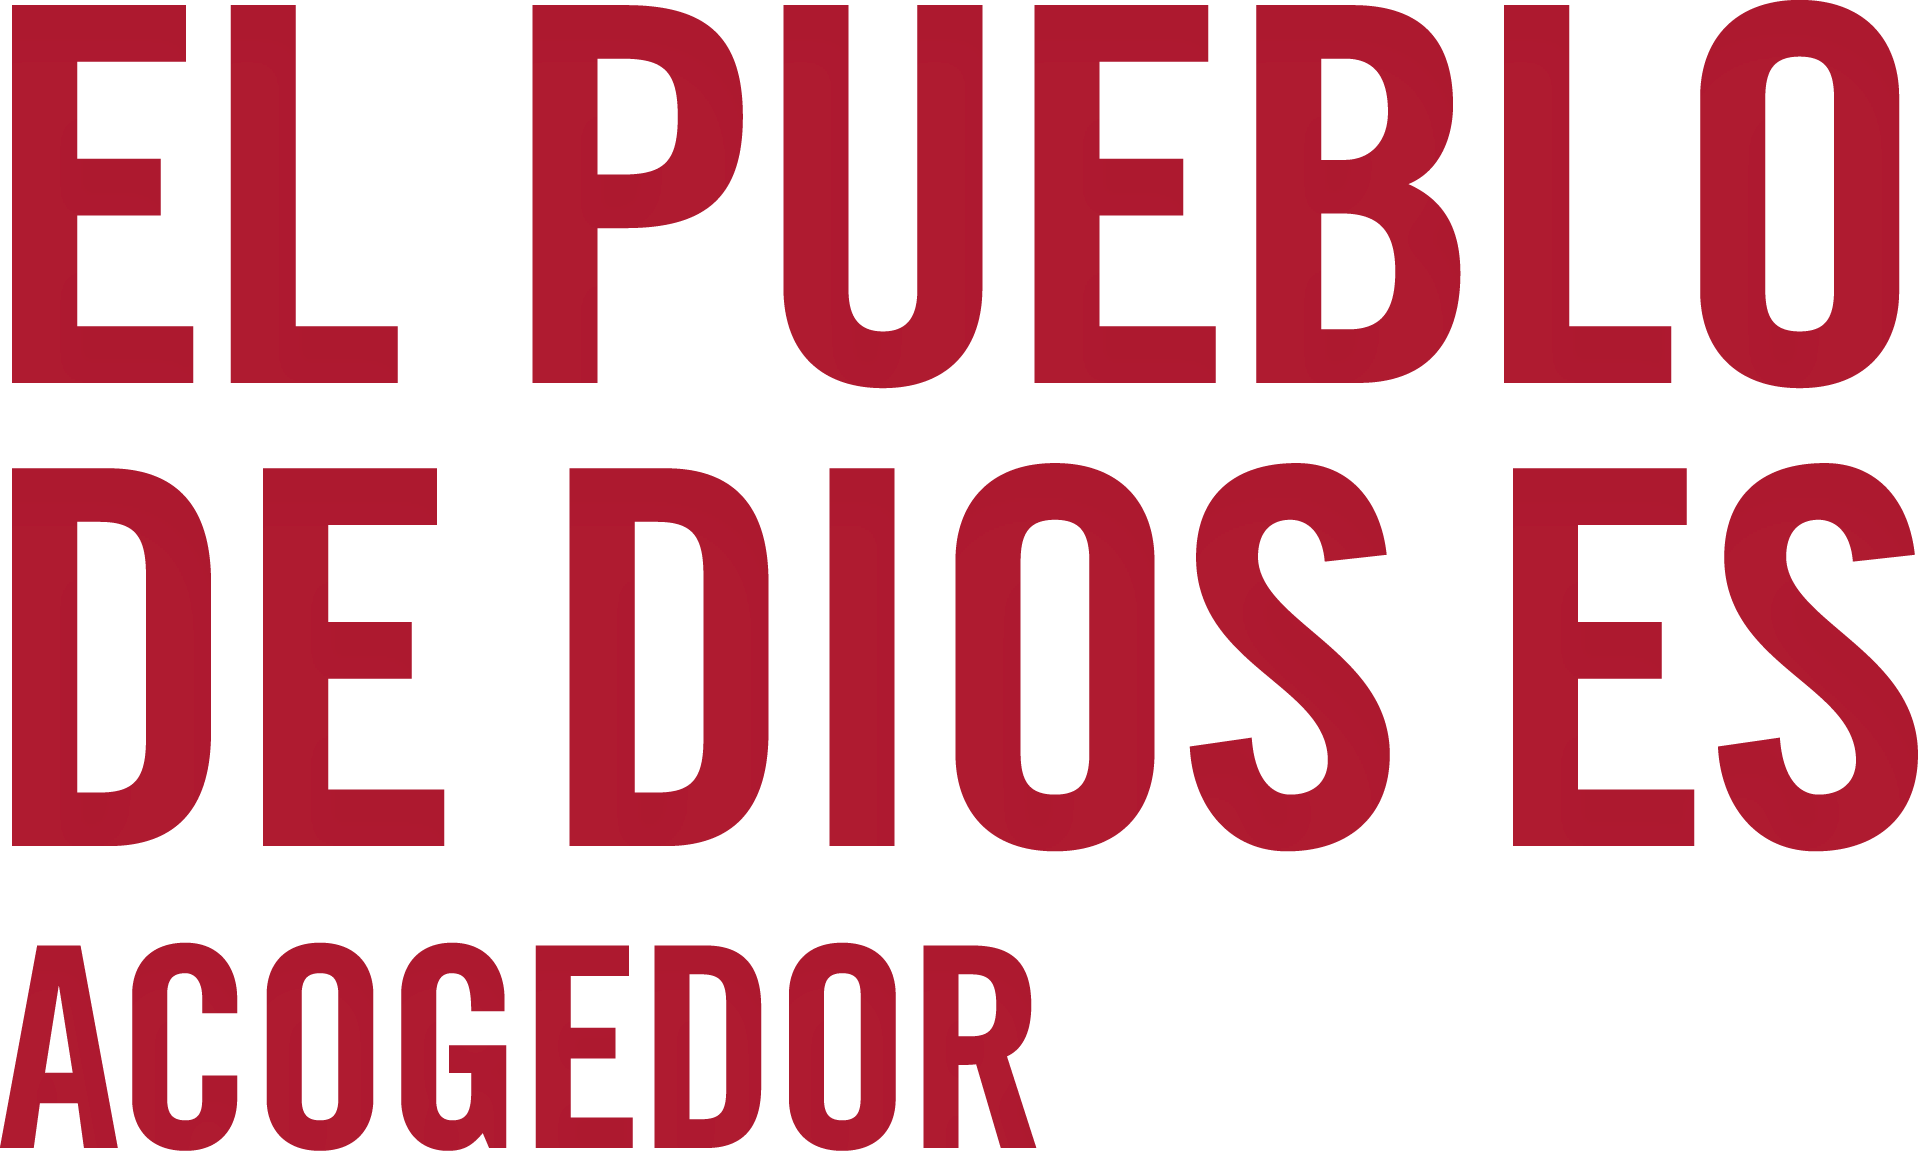 The #BeUMC campaign reminds us of who we are at our best. As people of God called The United Methodist Church, we’re faithful followers of Jesus seeking to make the world a better place. Welcoming/Greet (Design asset, Spanish title).